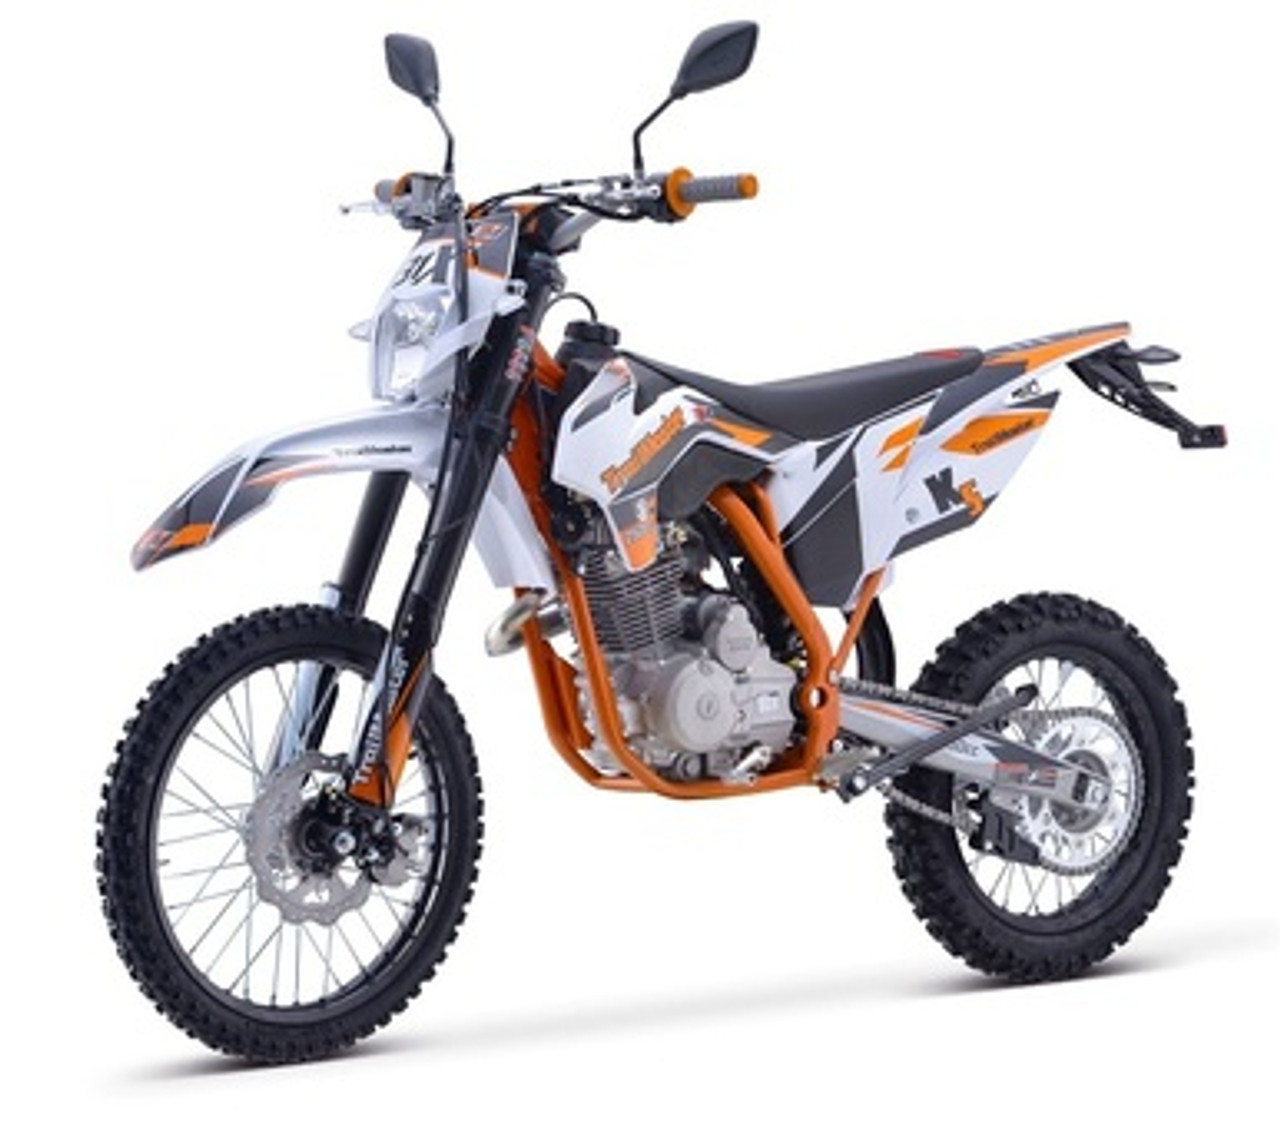 Buy New TrailMaster TM31X Deluxe Dirt Bike Available in Crate for sale at